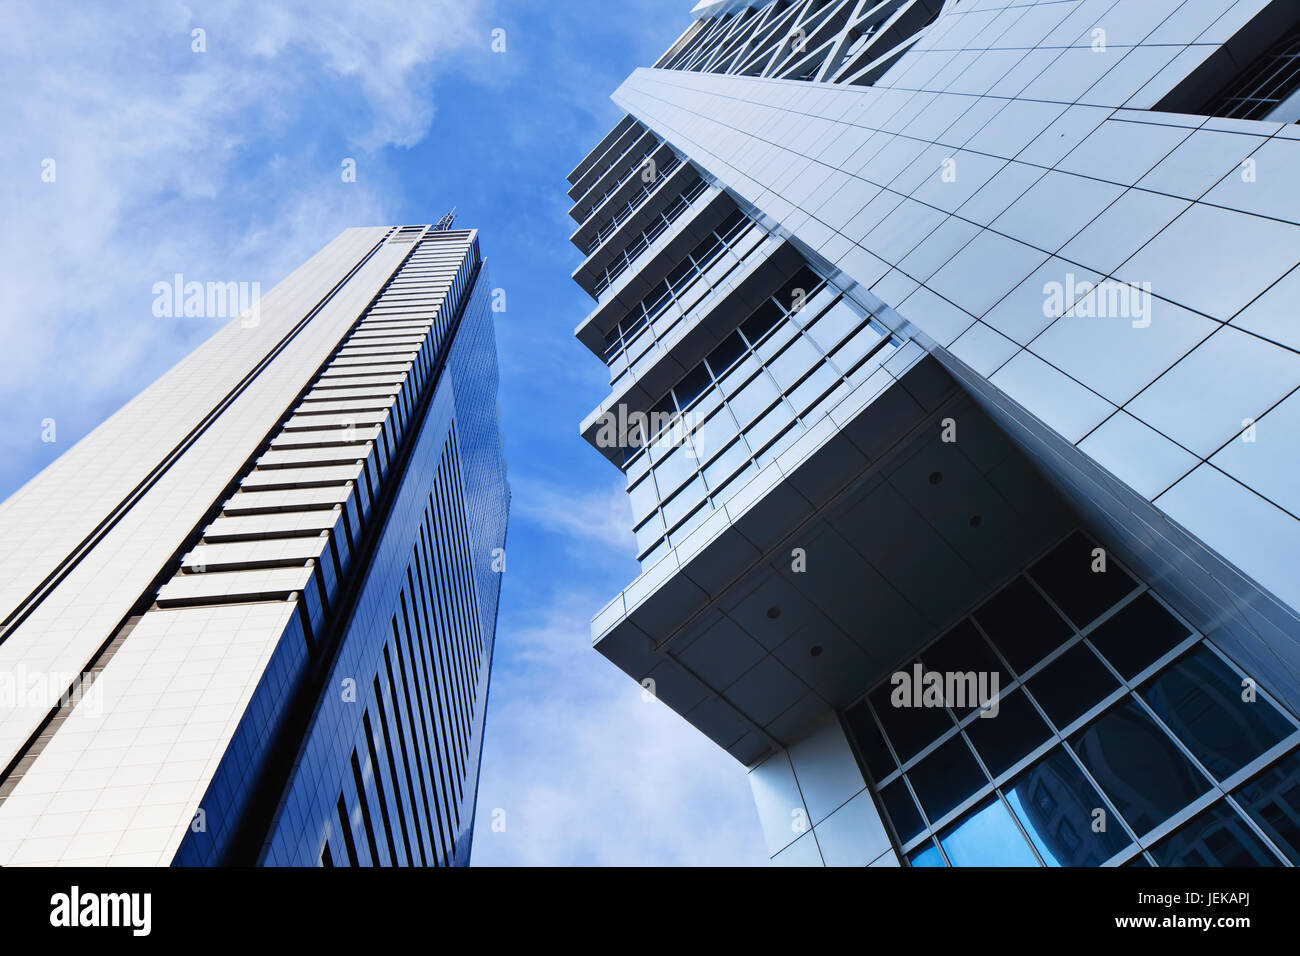 Sharp lines from modern architecture against a blue sky. Stock Photo